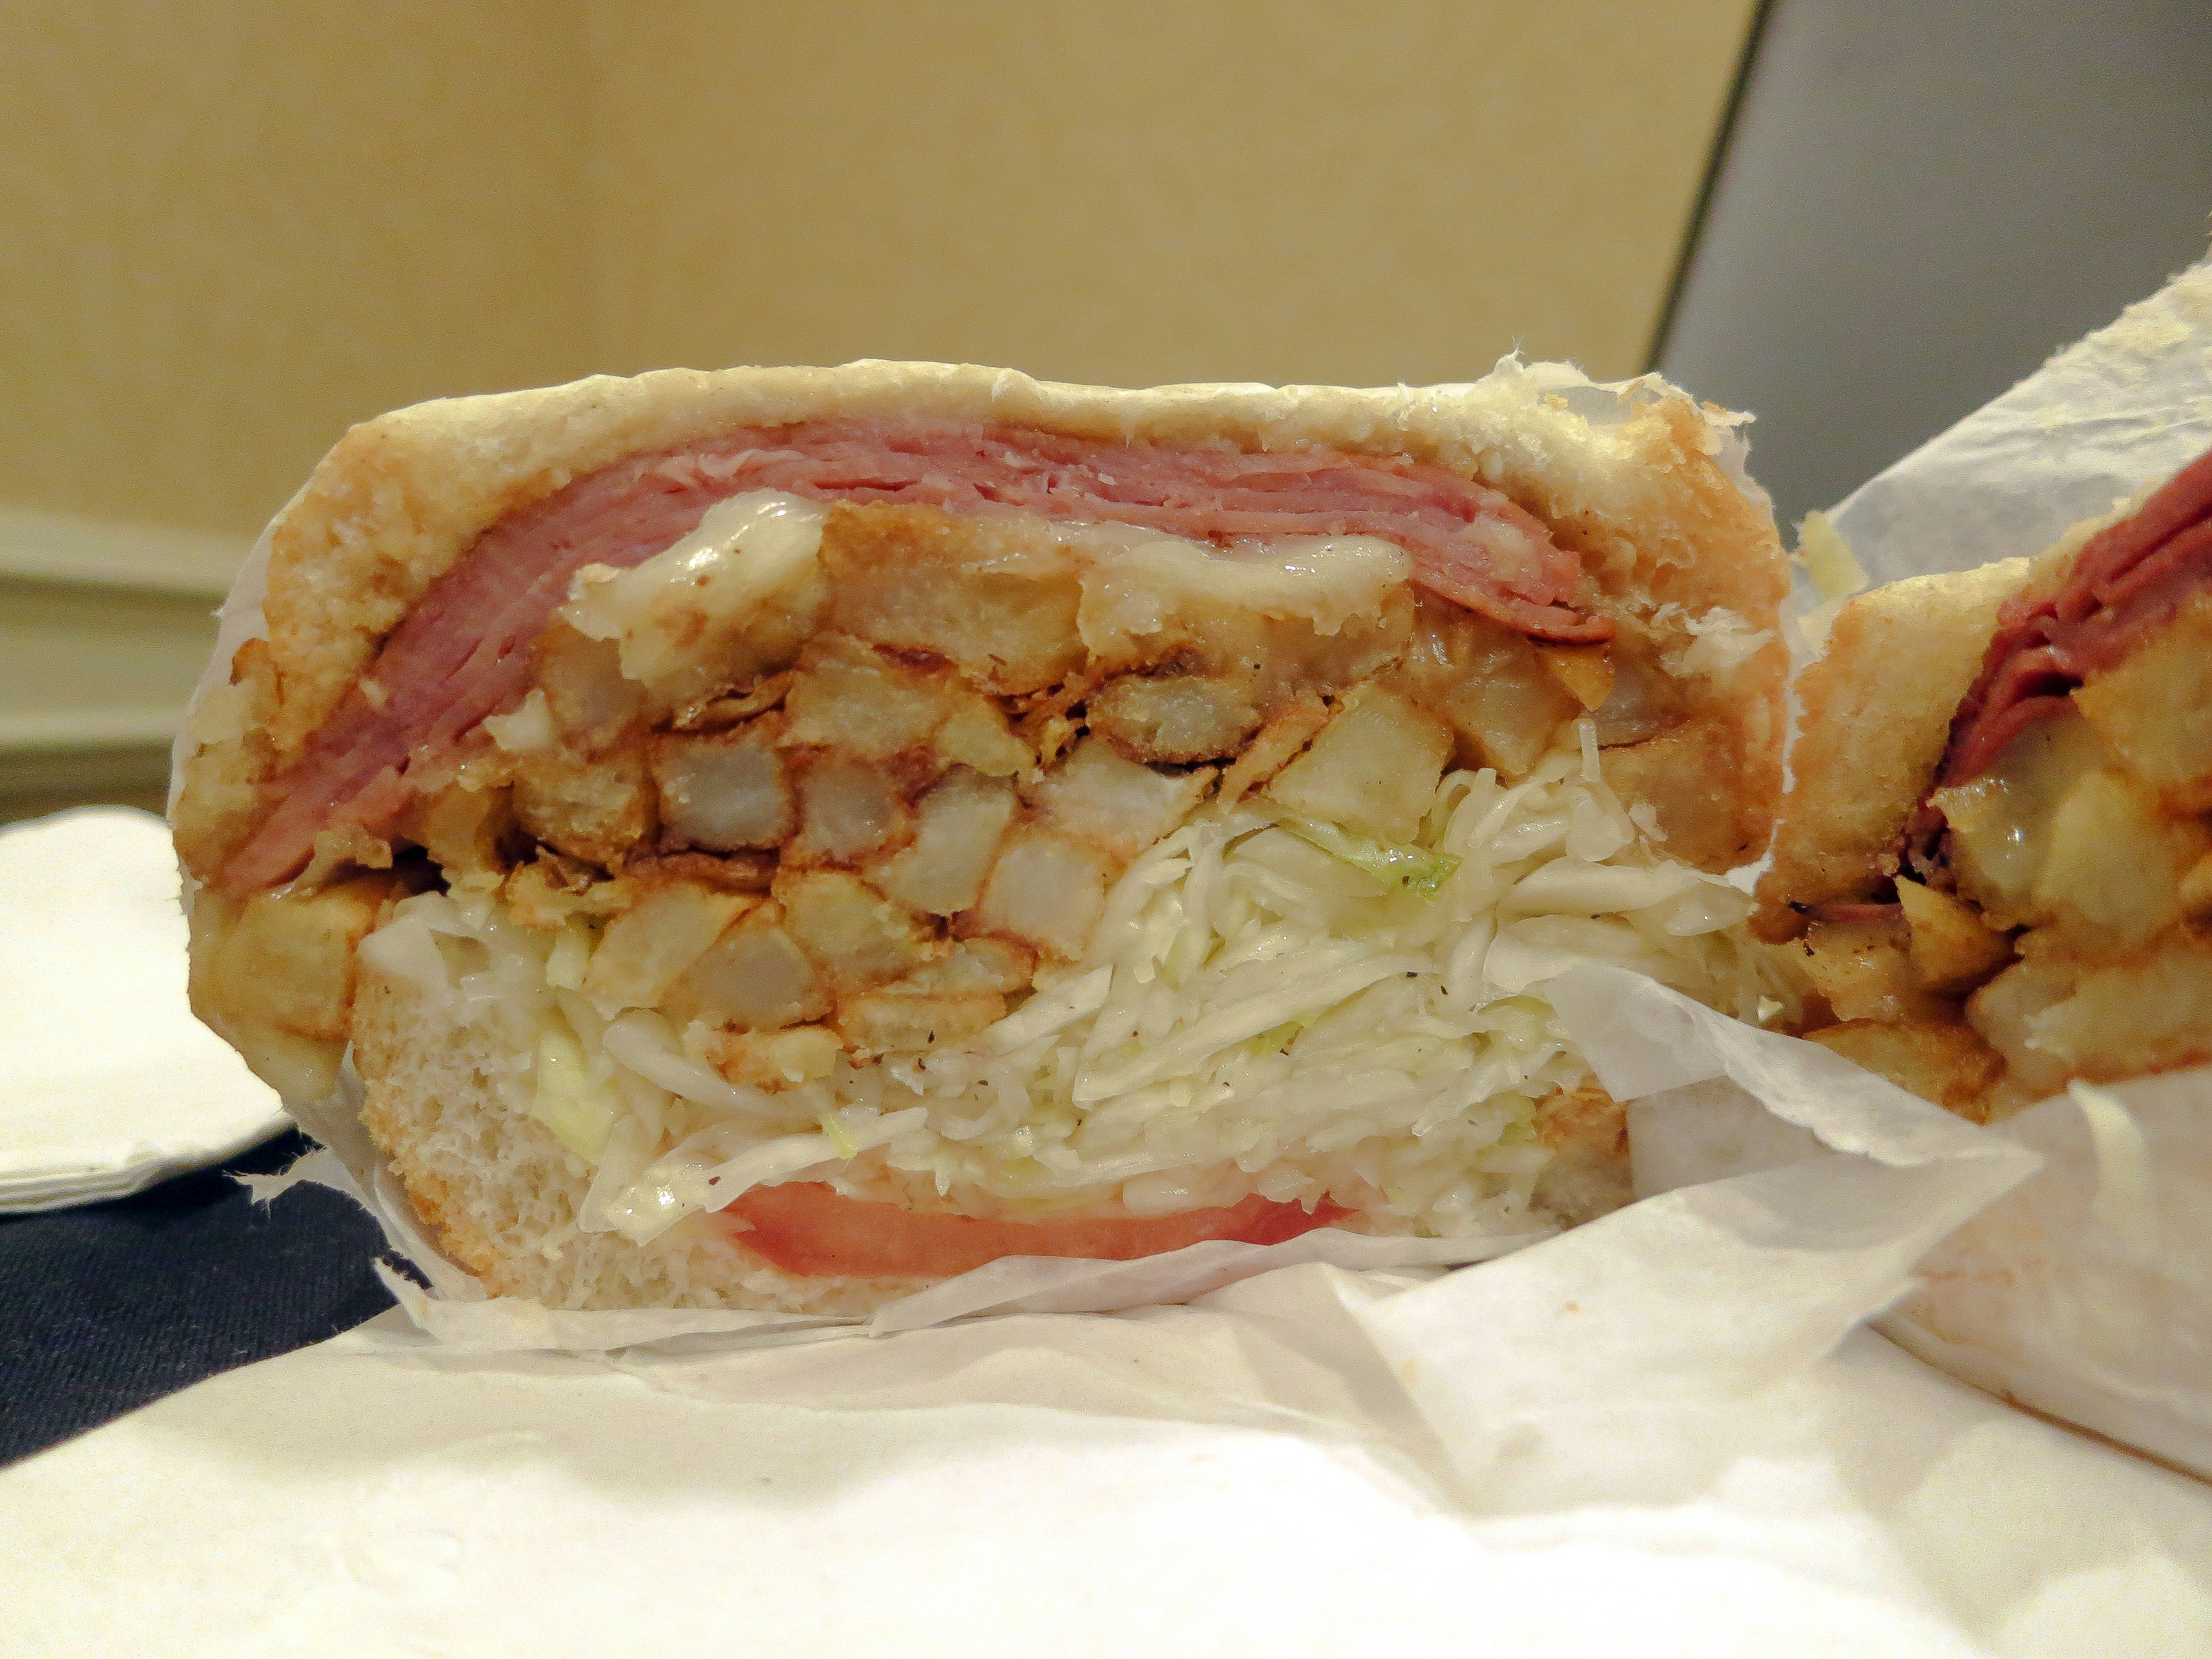 A true Pittsburgh original, this Primanti Brothers sandwich is stuffed with slaw and french fries. 